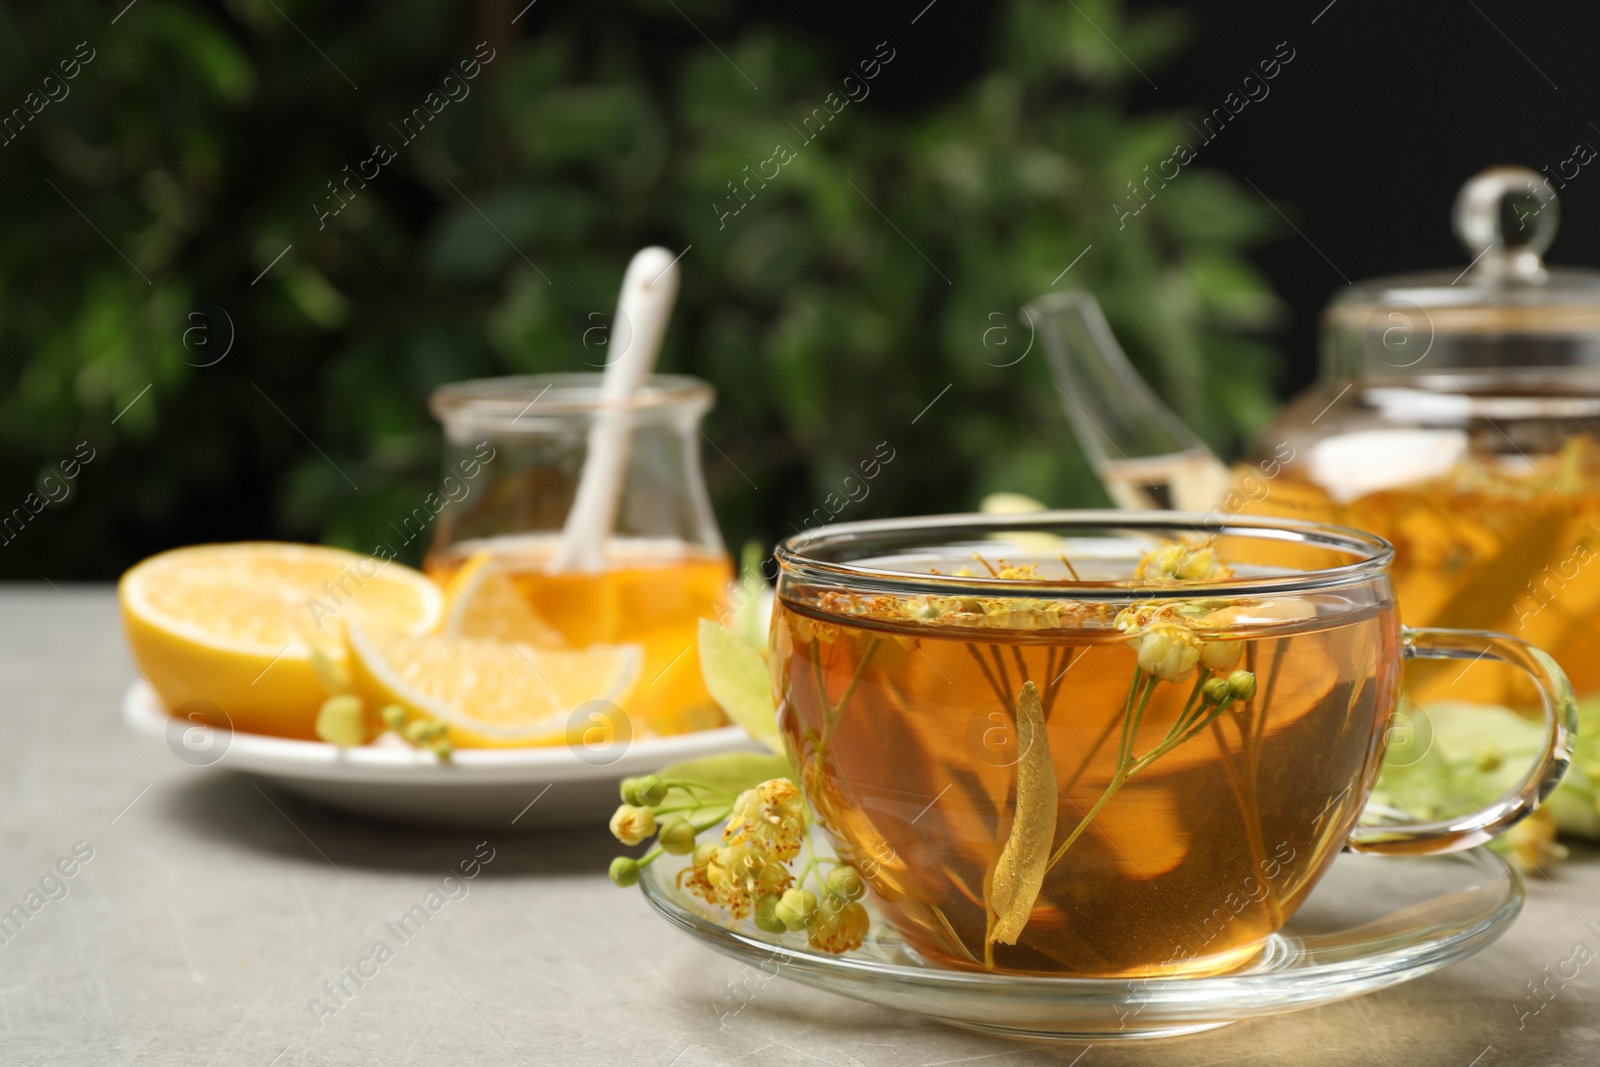 Photo of Cup of tea with linden blossom on light grey table, Space for text